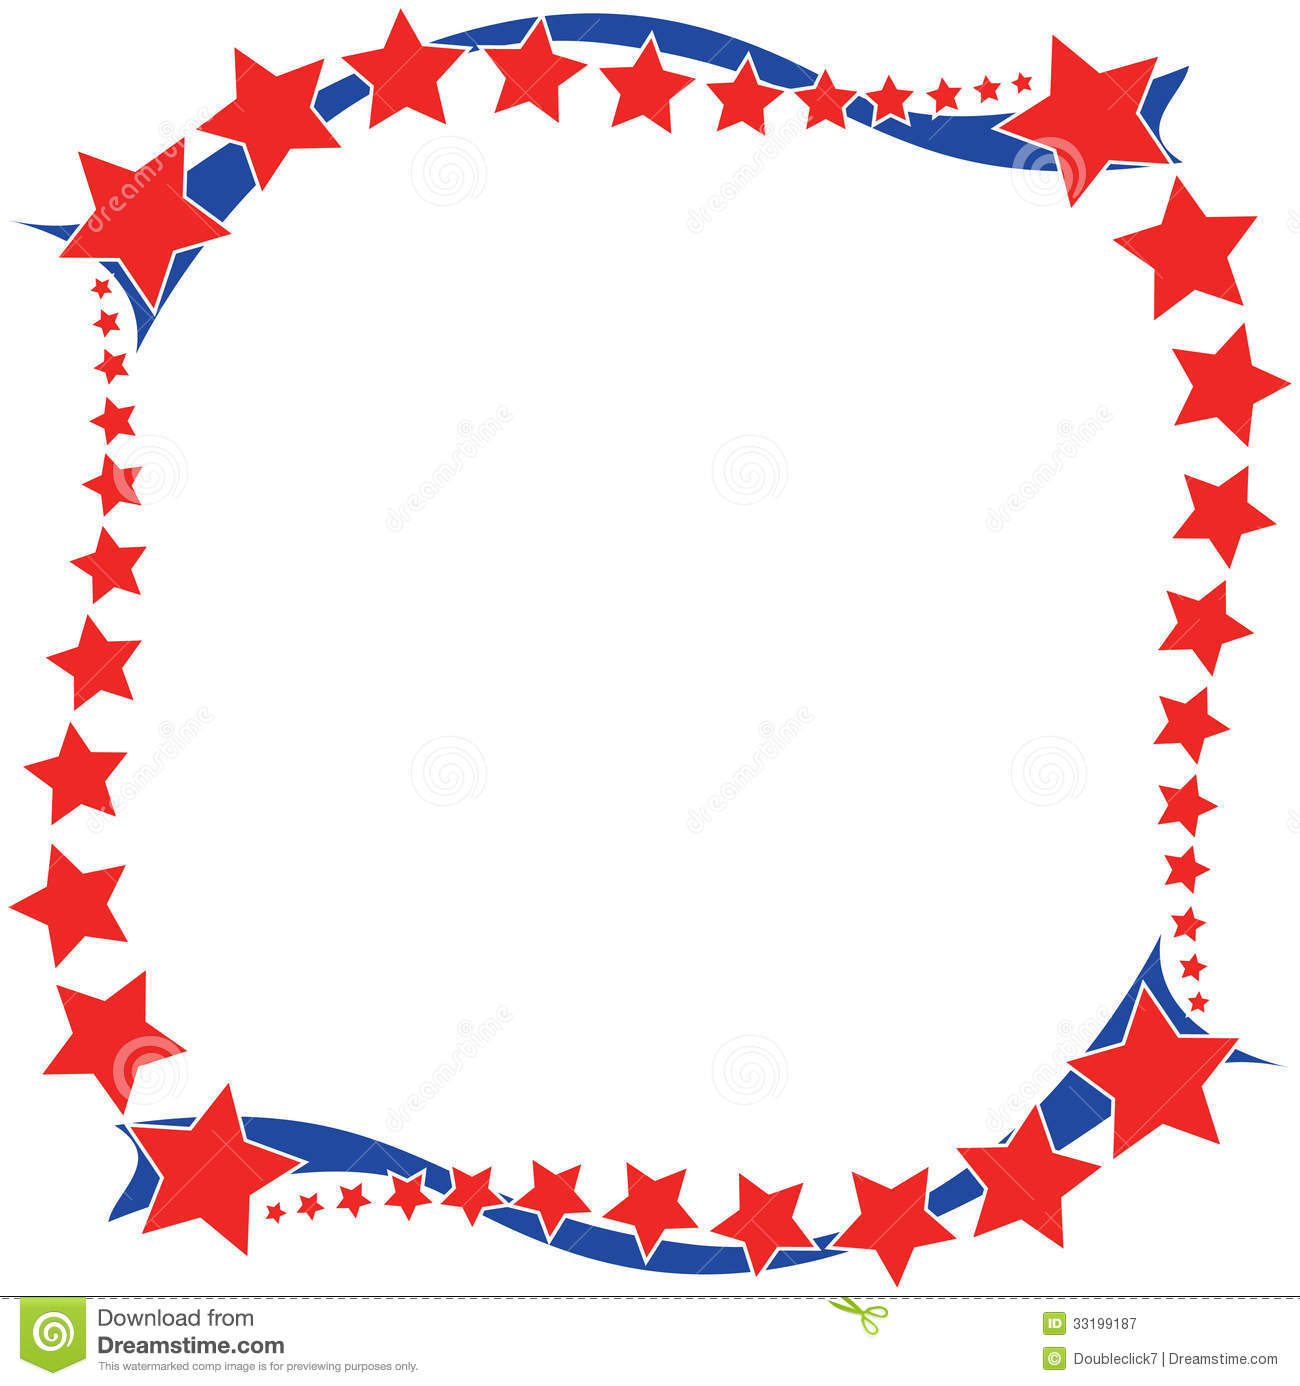 Red White A Blue Star Border Royalty Free Stock Photography   Image